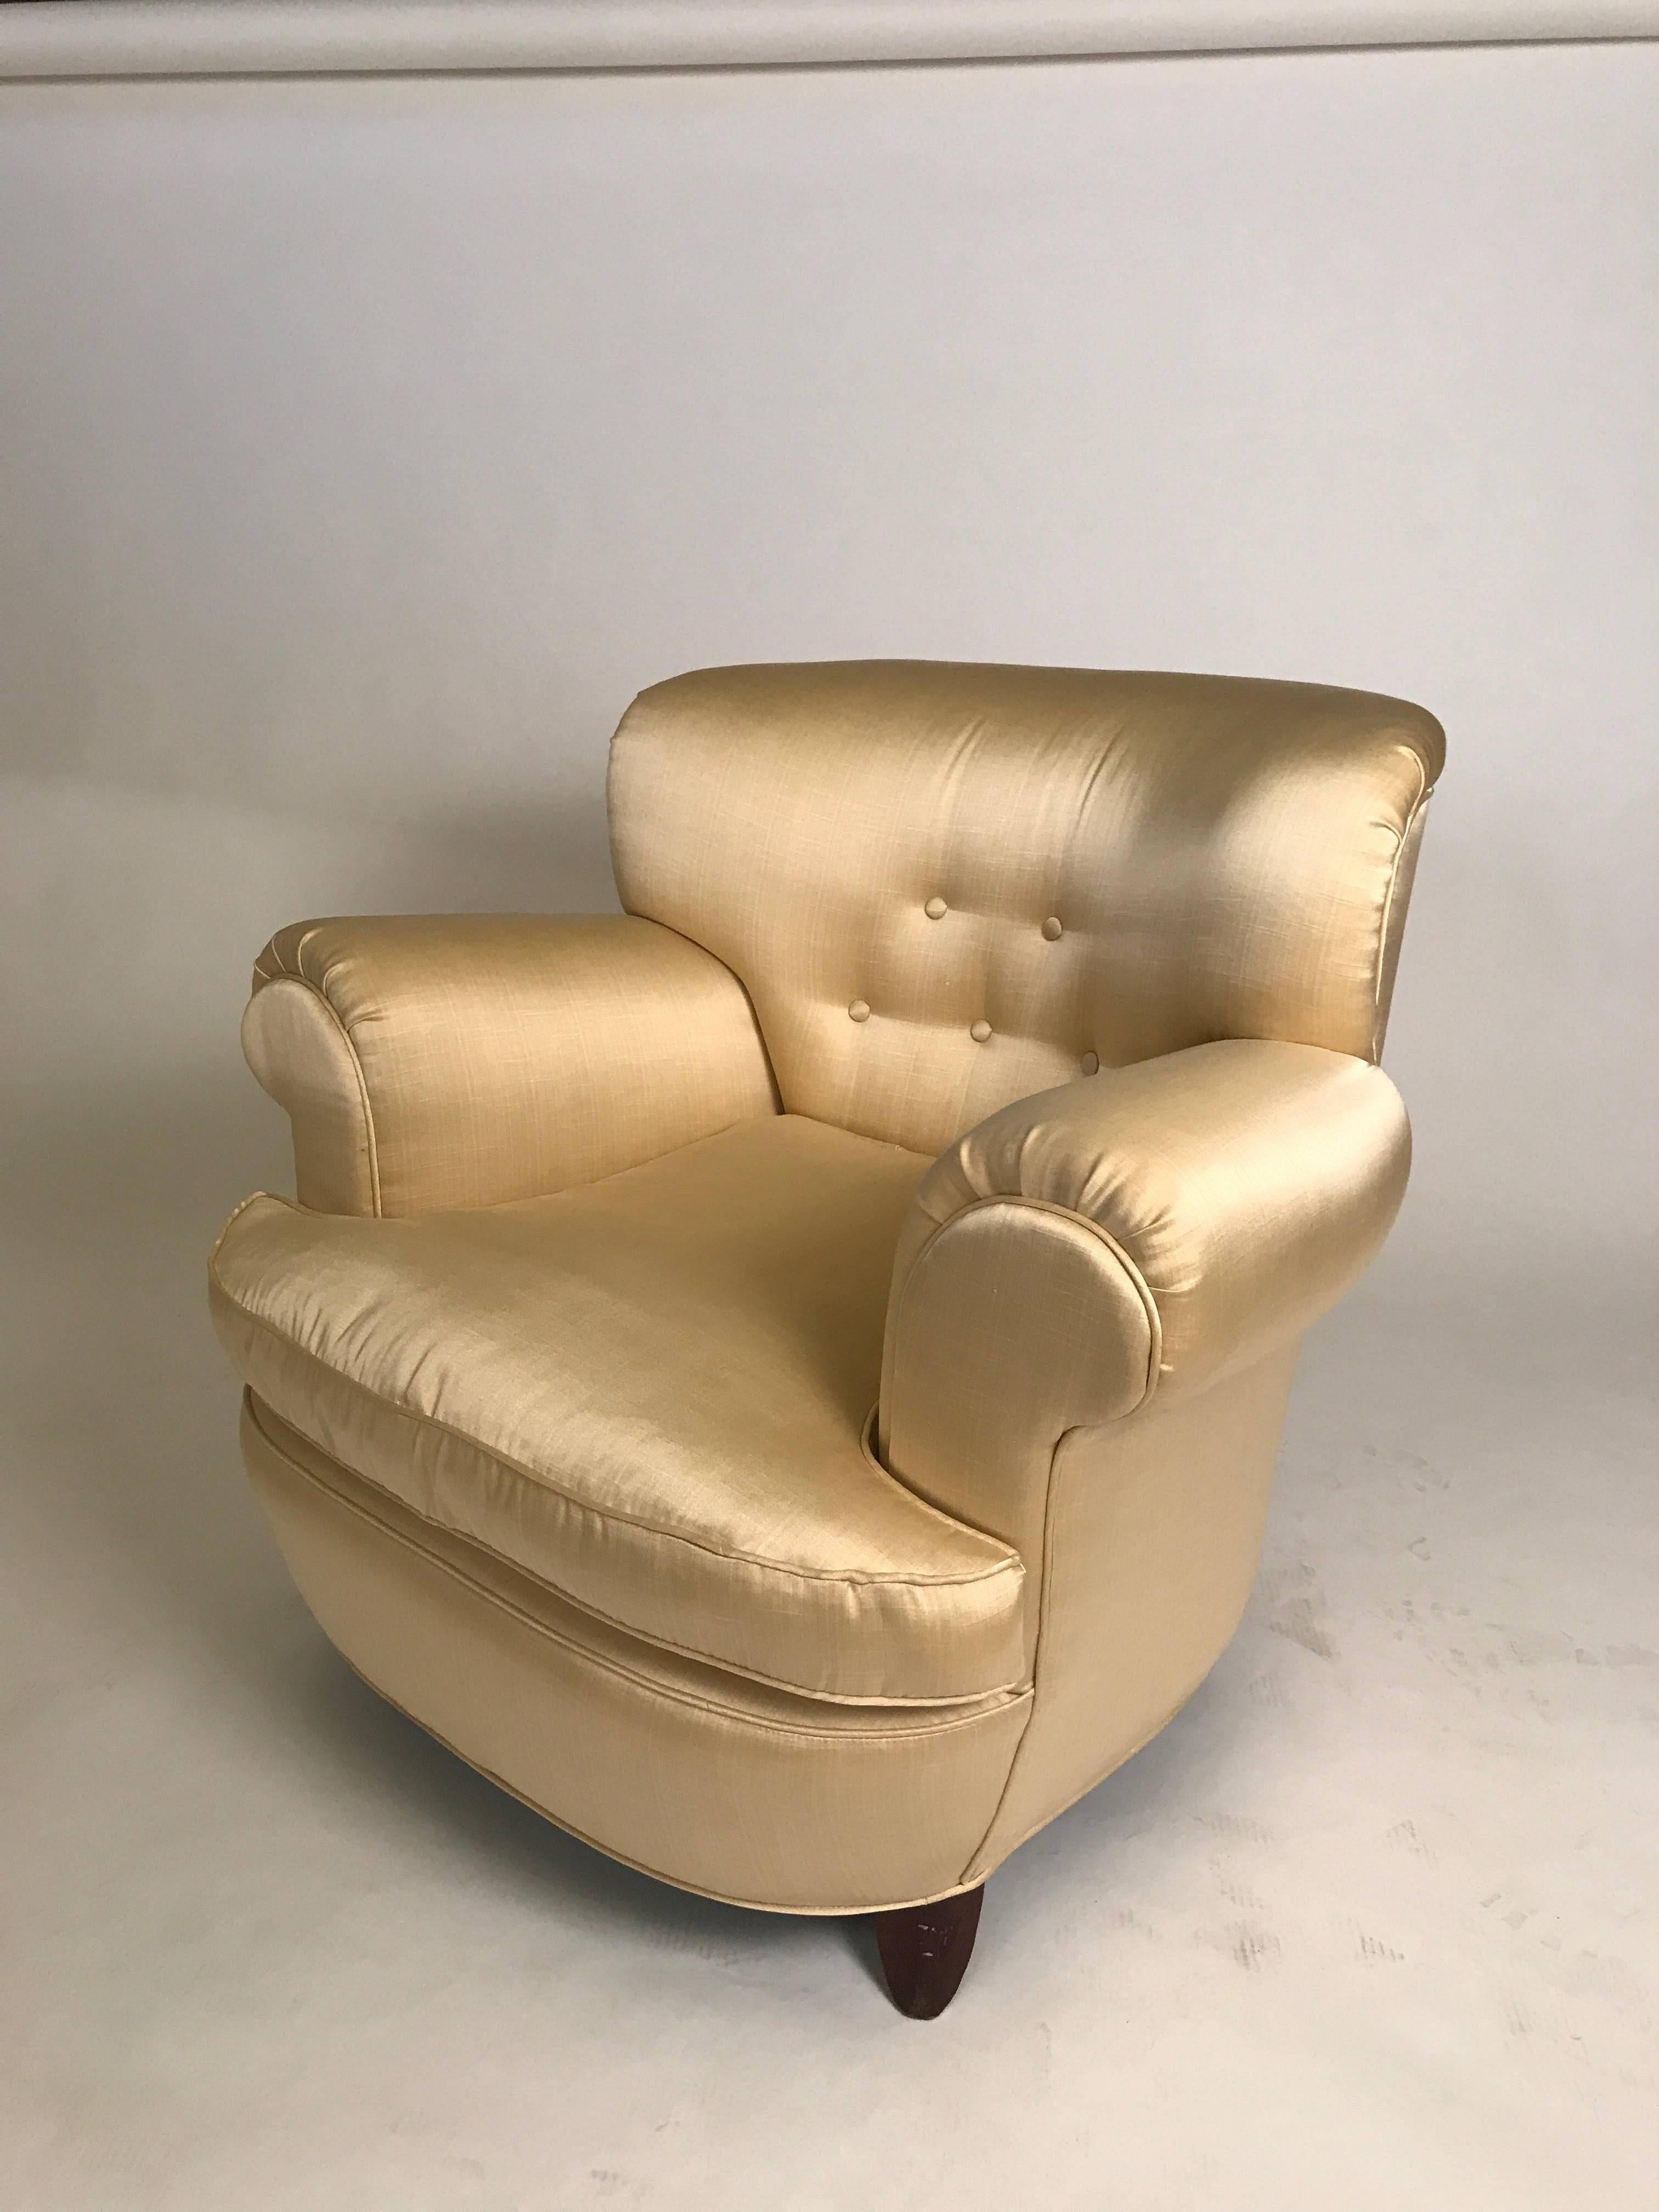 Classic Art Deco Club Chairs In Excellent Condition For Sale In Hudson, NY